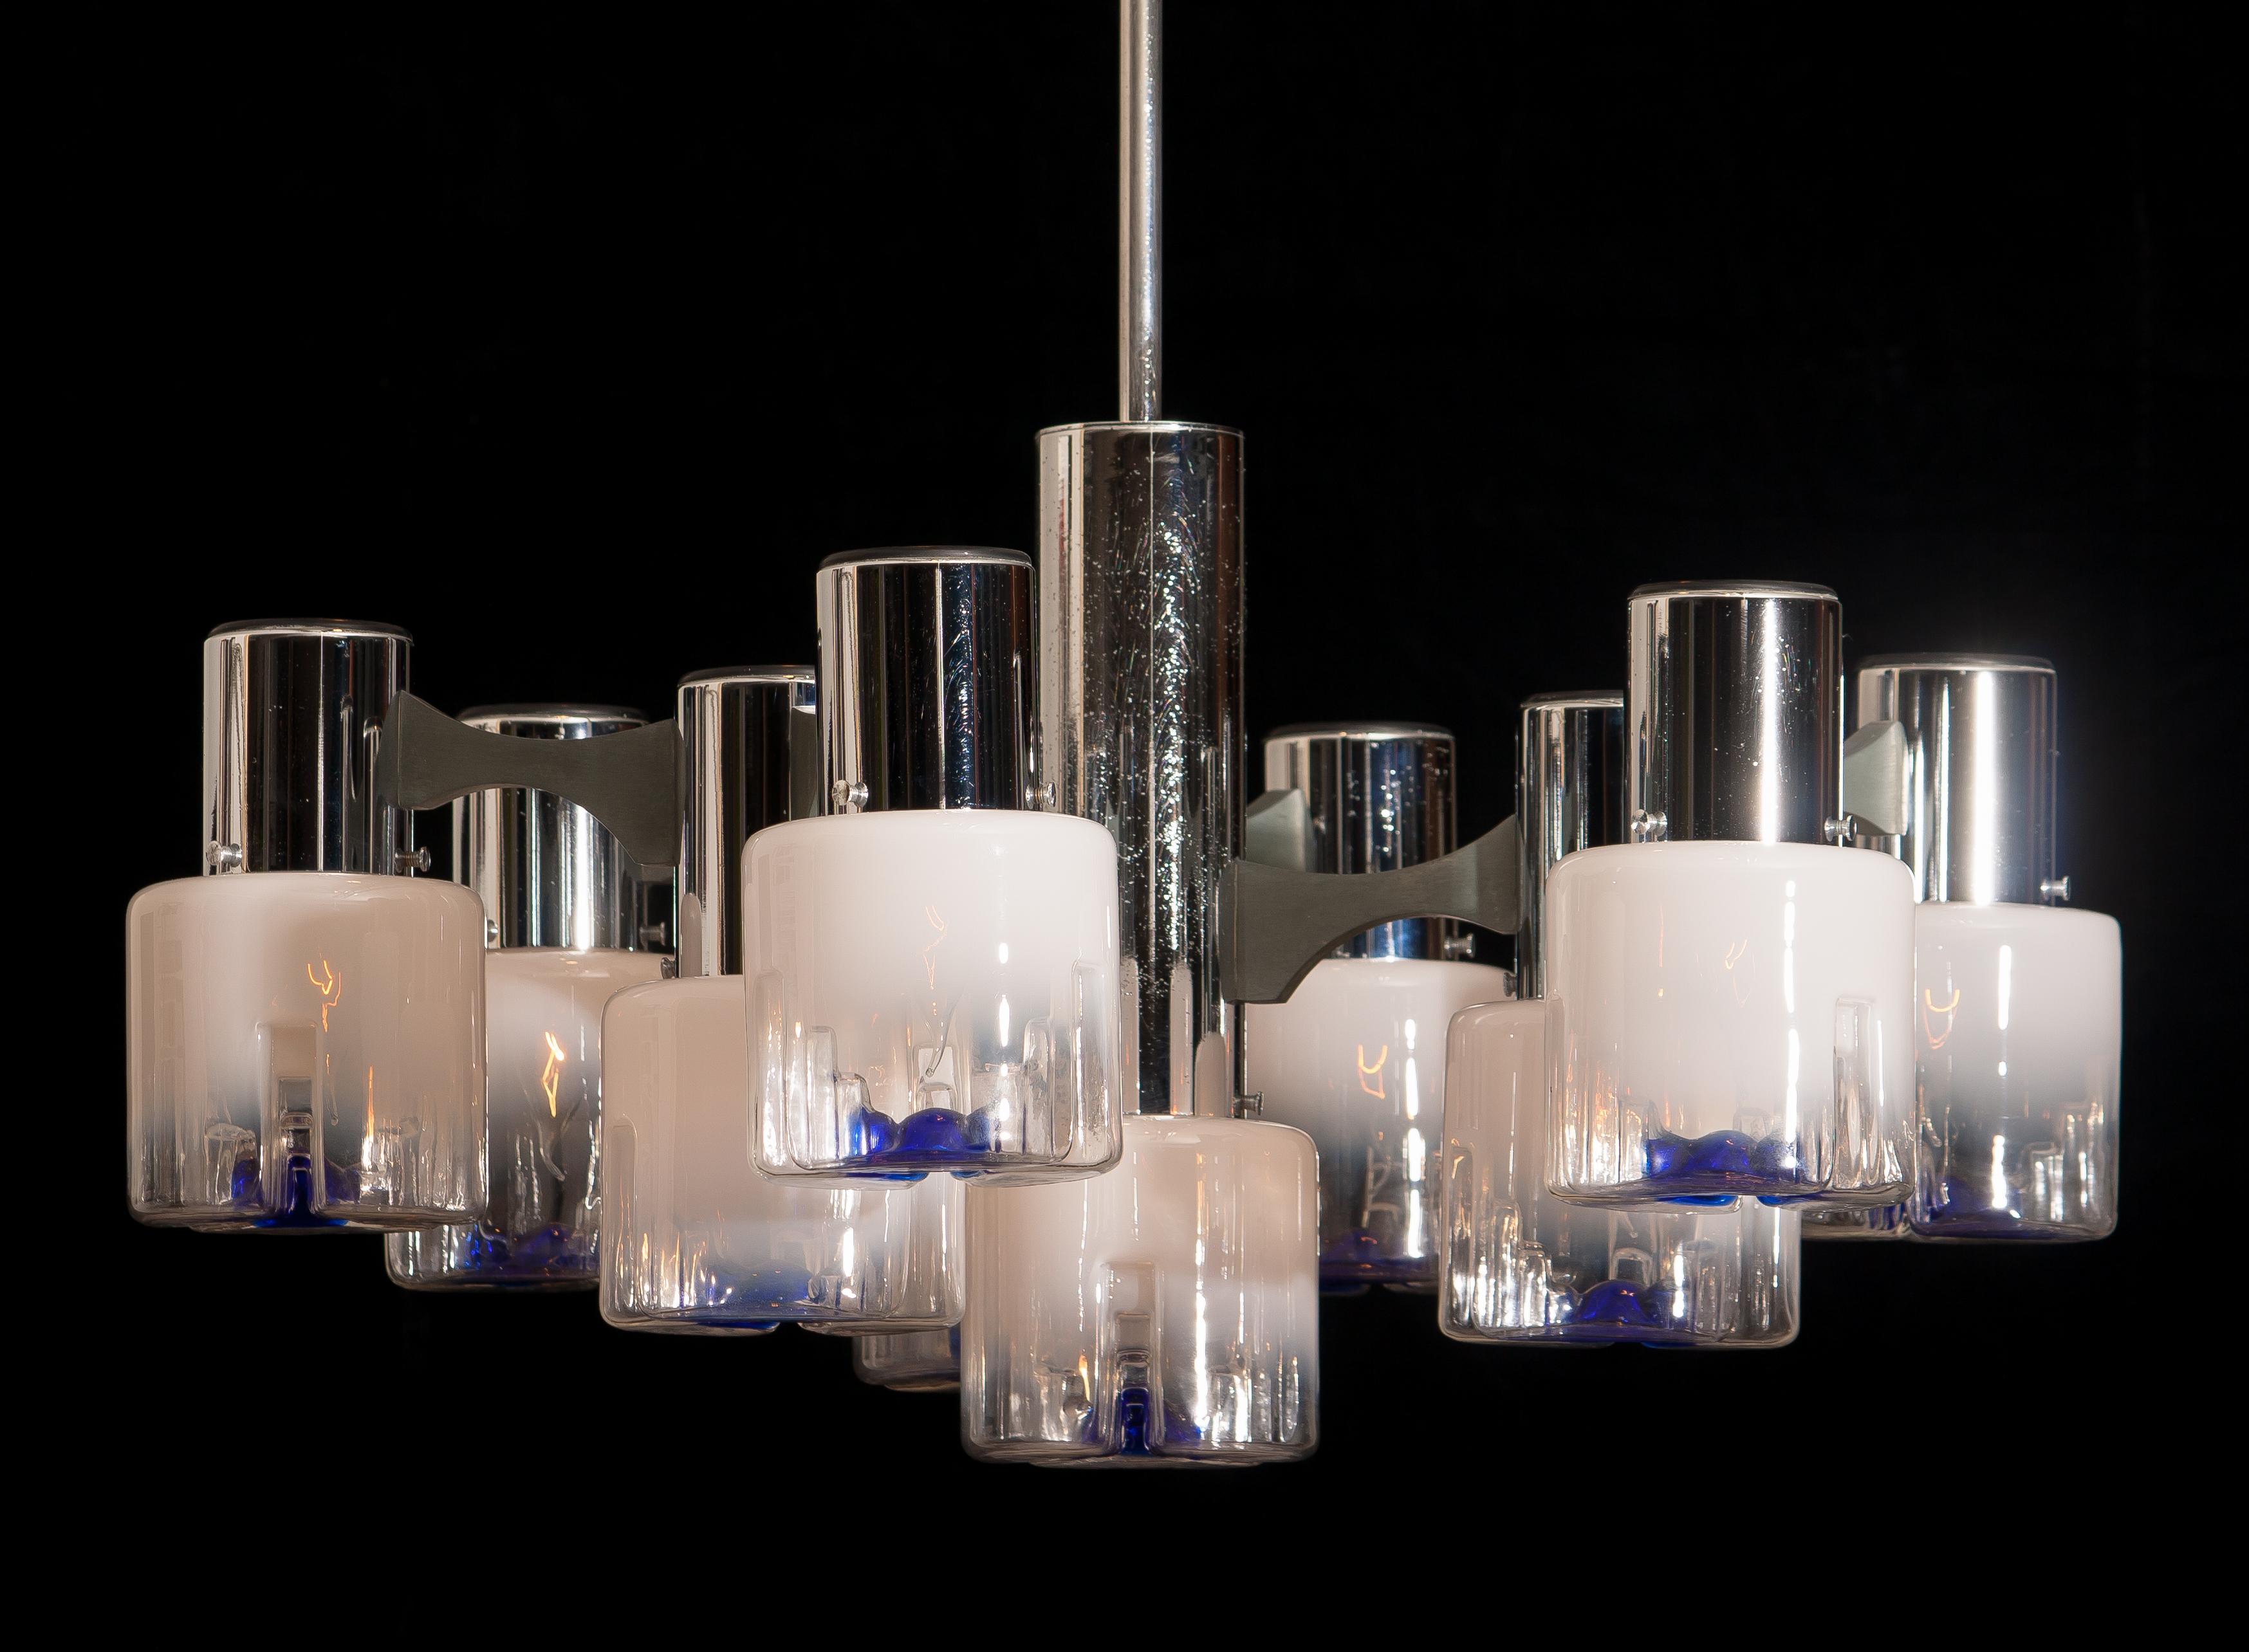 Mazzega chandelier in the fabulous design of the 1970 and filled with Murano crystal overflowing shades.
Chromed steel frame. Ten crystal shades of Murano Mazzega. The shades are overflowing from white to transparent and in the bottom a bleu (